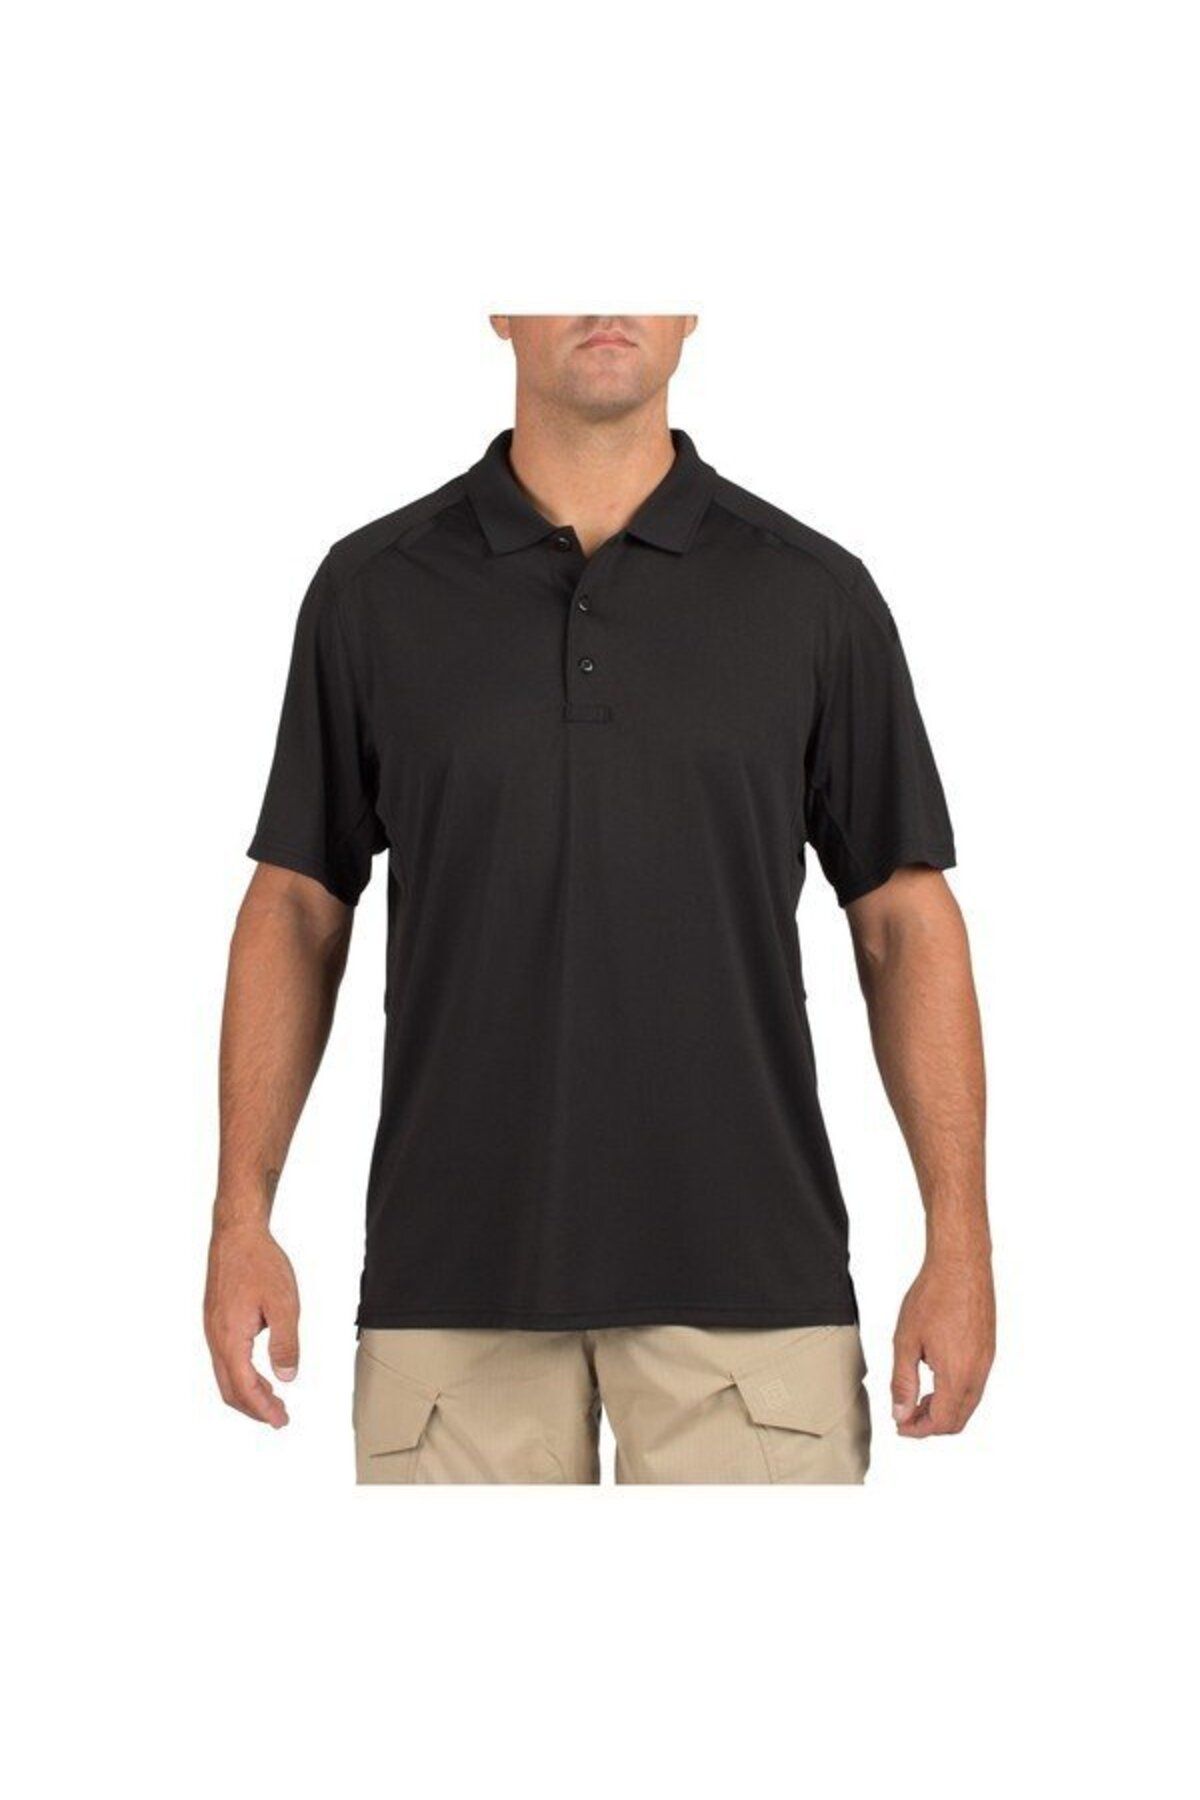 5.11 Tactical 5.11 CHARCOAL S/S HELIOS POLO T-SHIRT